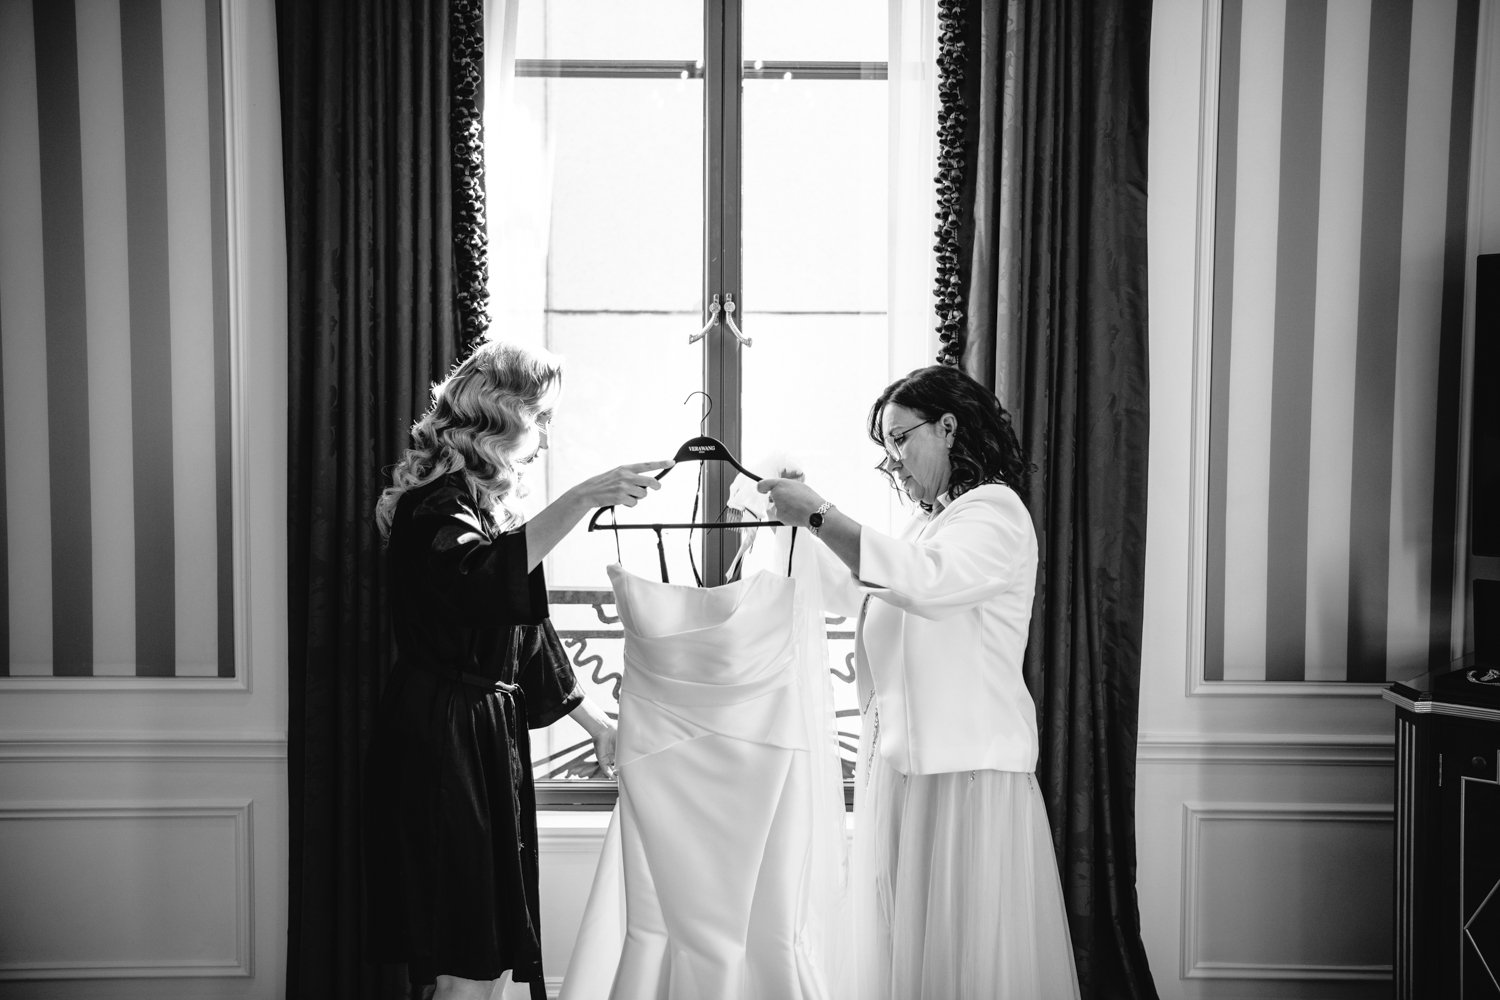 Bride and her mother are holding up the bride's wedding dress against a window.

Manhattan Luxury Wedding. New York Luxury Wedding Photographer. Wedding in Manhattan. NYC Luxury Wedding.